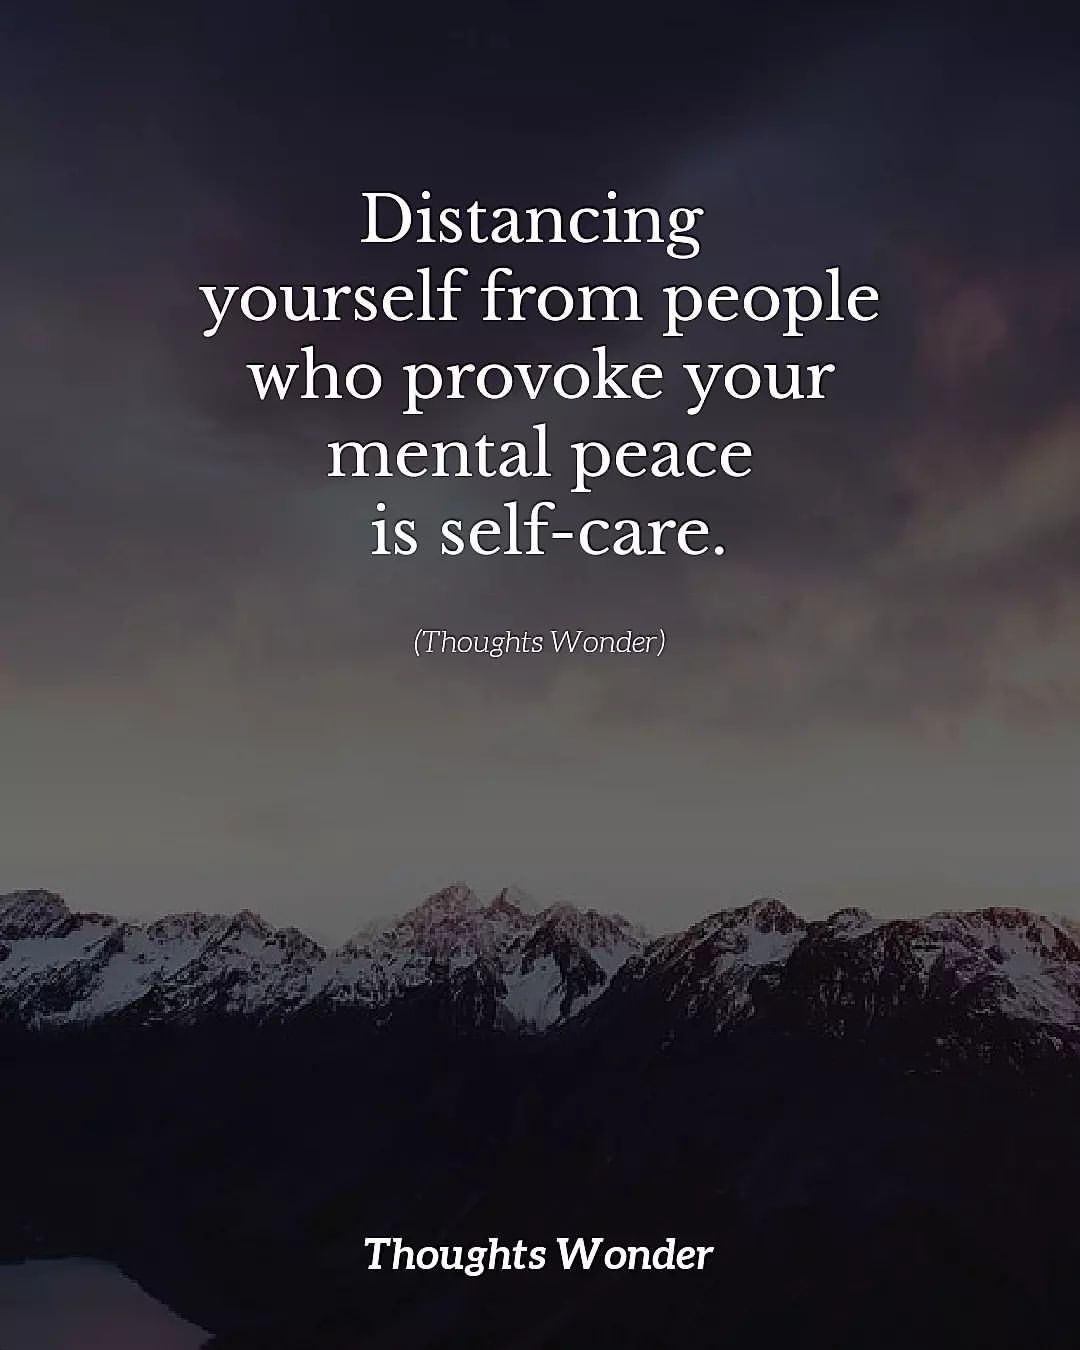 Distancing yourself from people who provoke your mental peace is self-care.